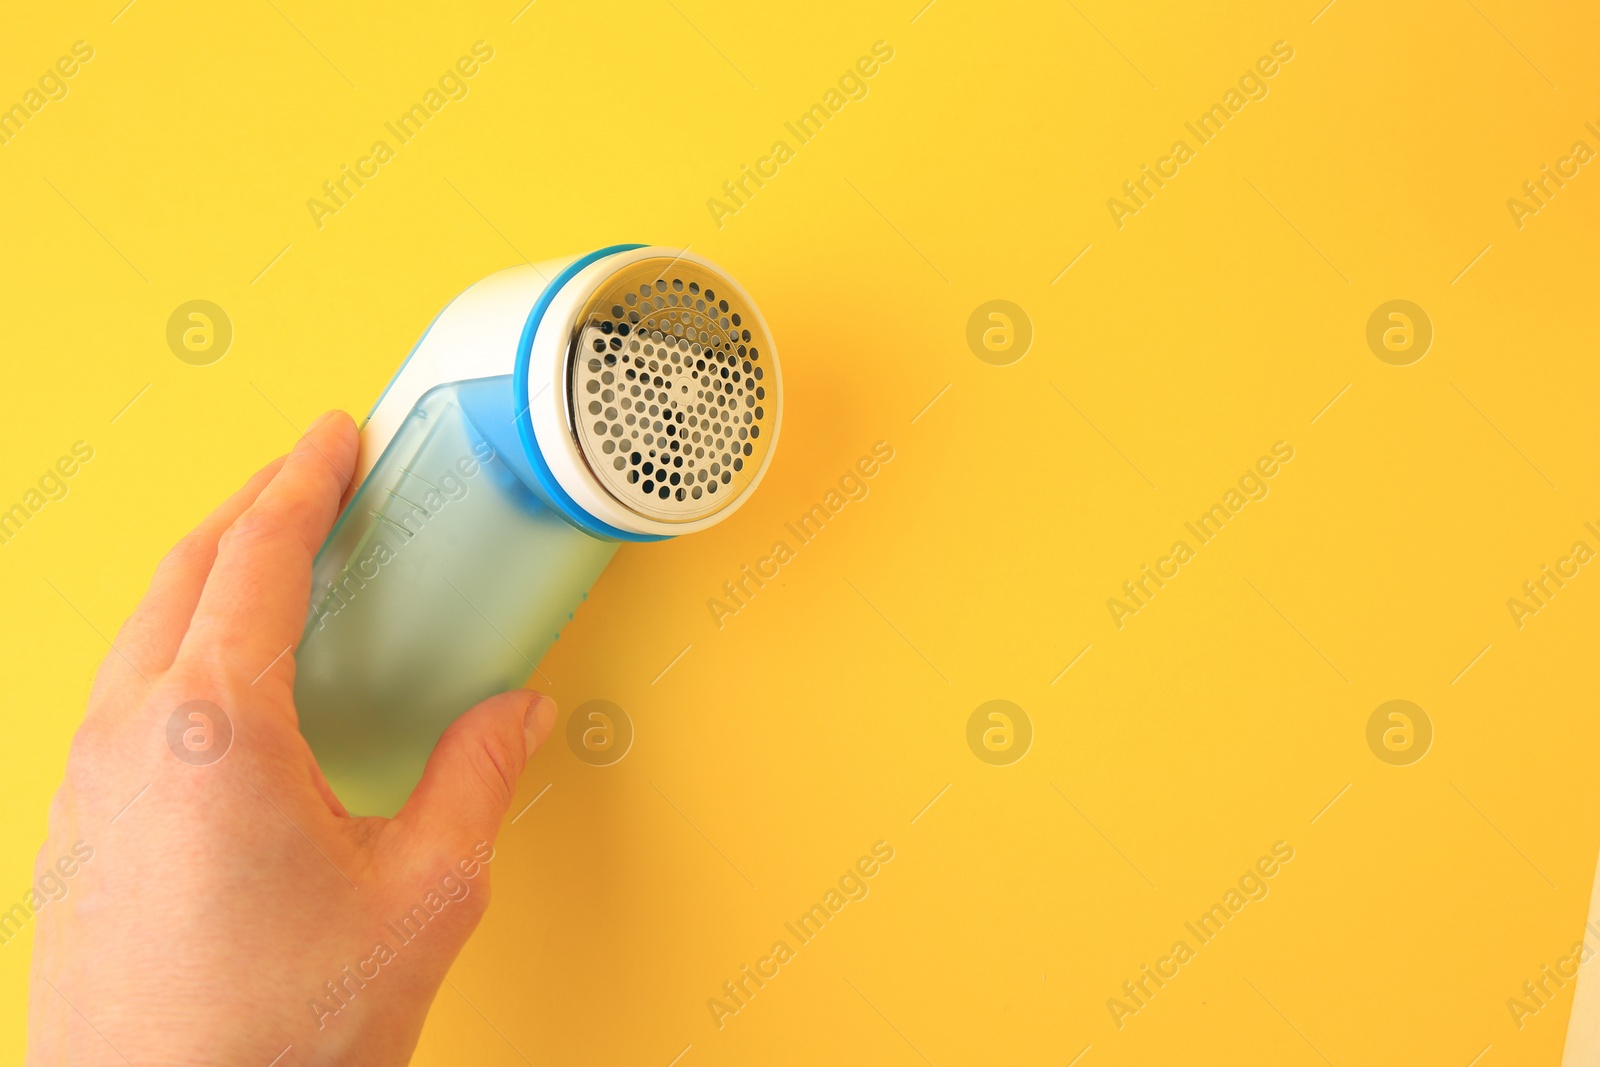 Photo of Woman holding modern fabric shaver on yellow background, closeup. Space for text